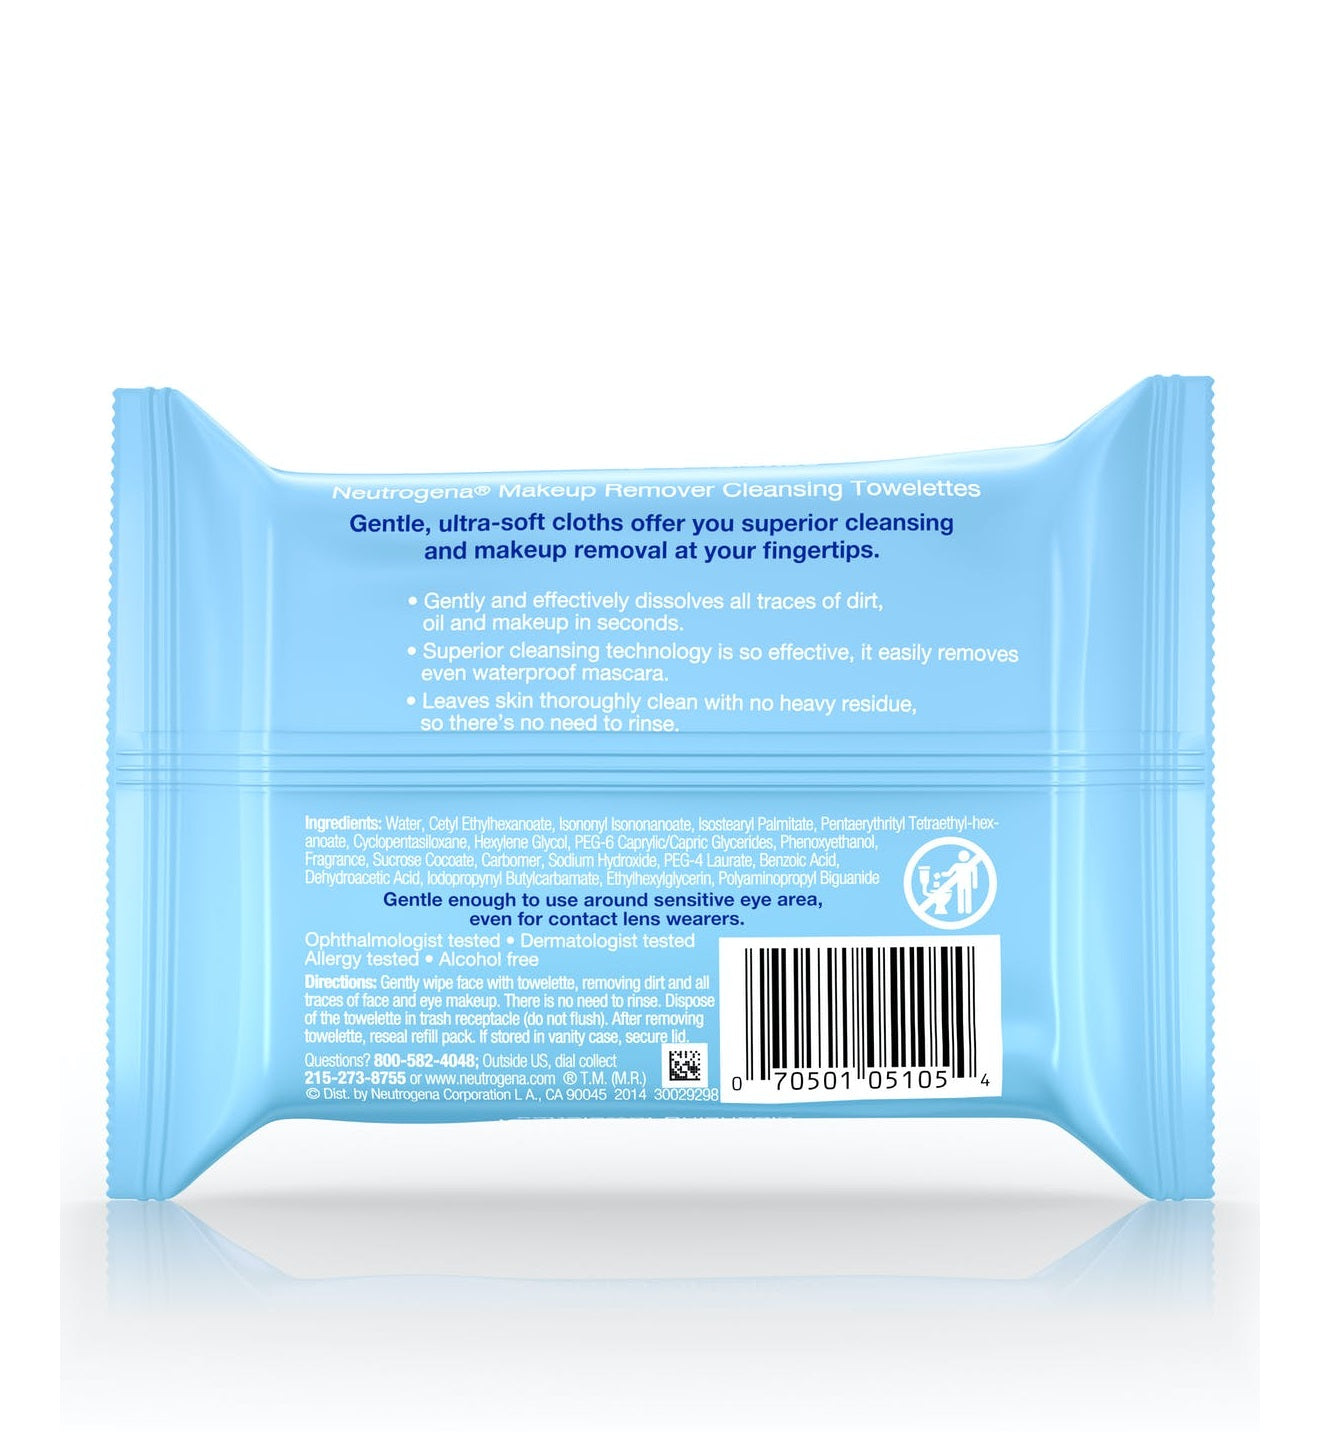 Neutrogena Makeup Remover Cleansing Towelettes Refill Pack, 25 Count